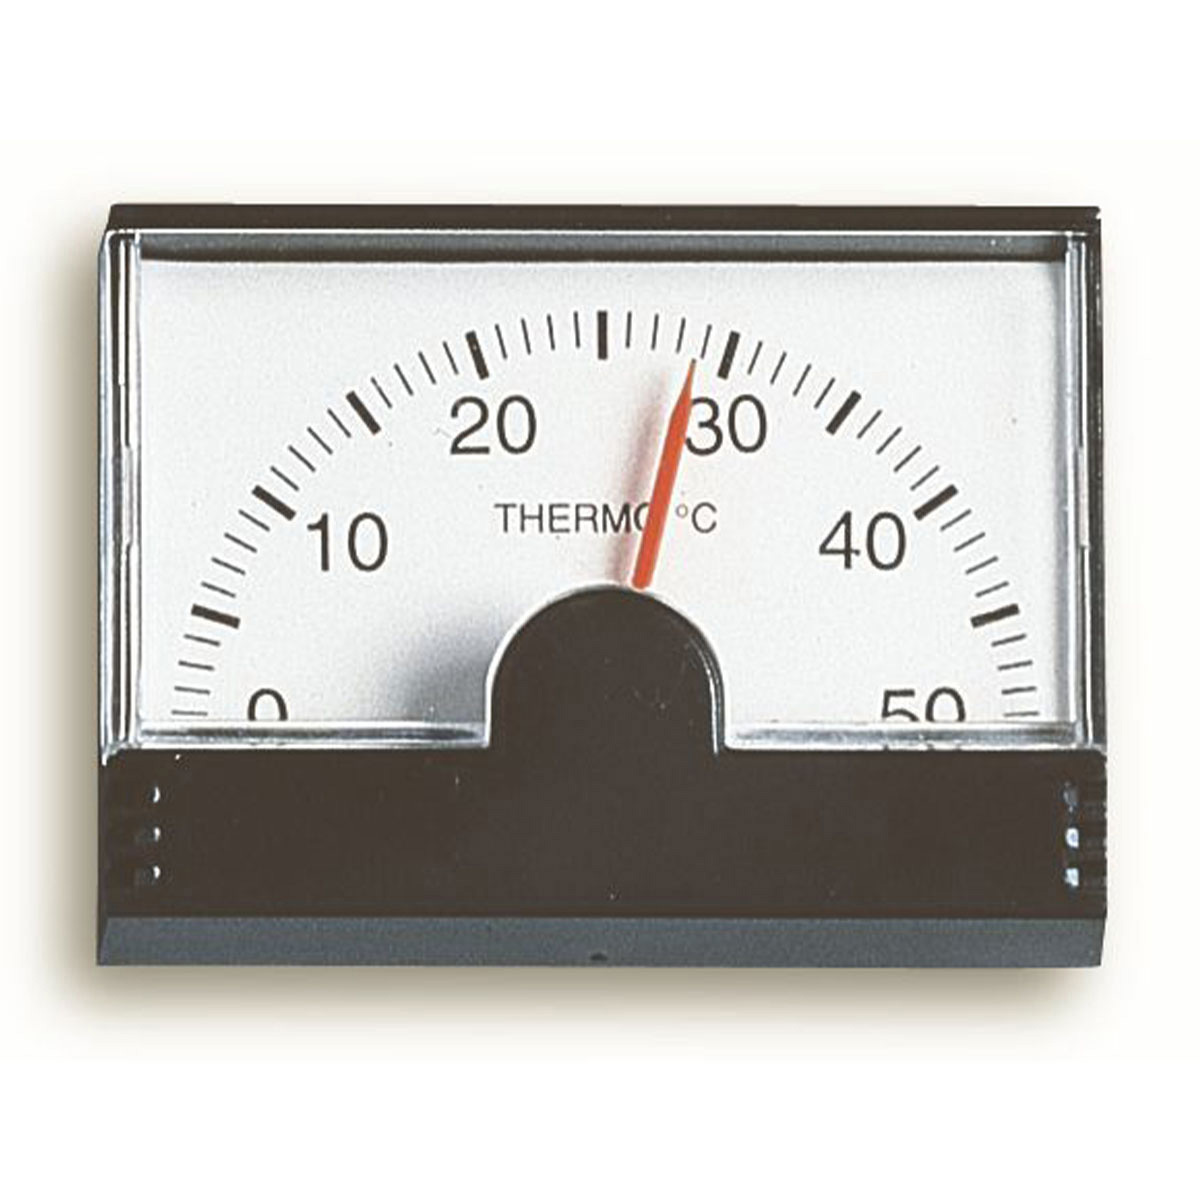 16-1002-analoges-thermometer-1200x1200px.jpg